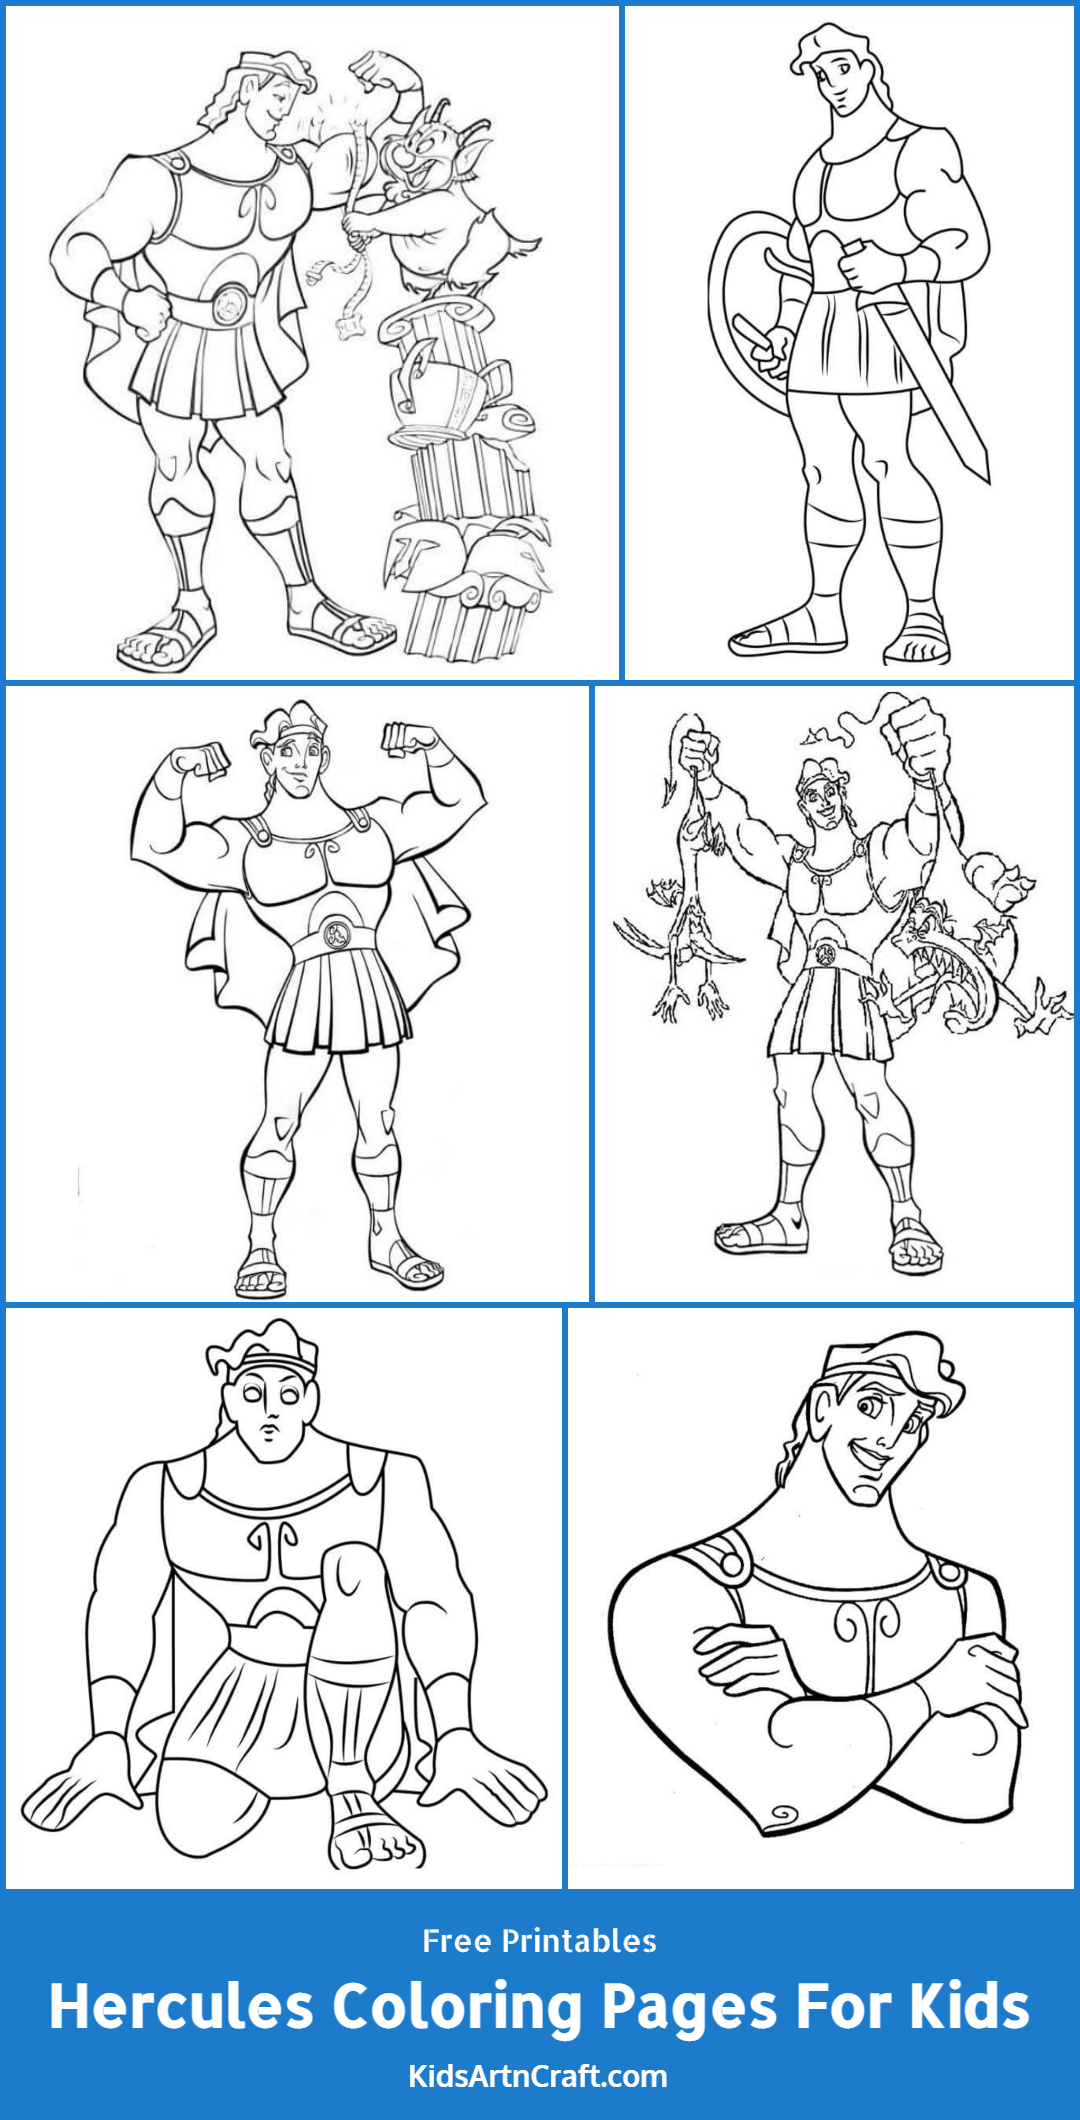 Hercules Coloring Pages For Kids – Free Printables